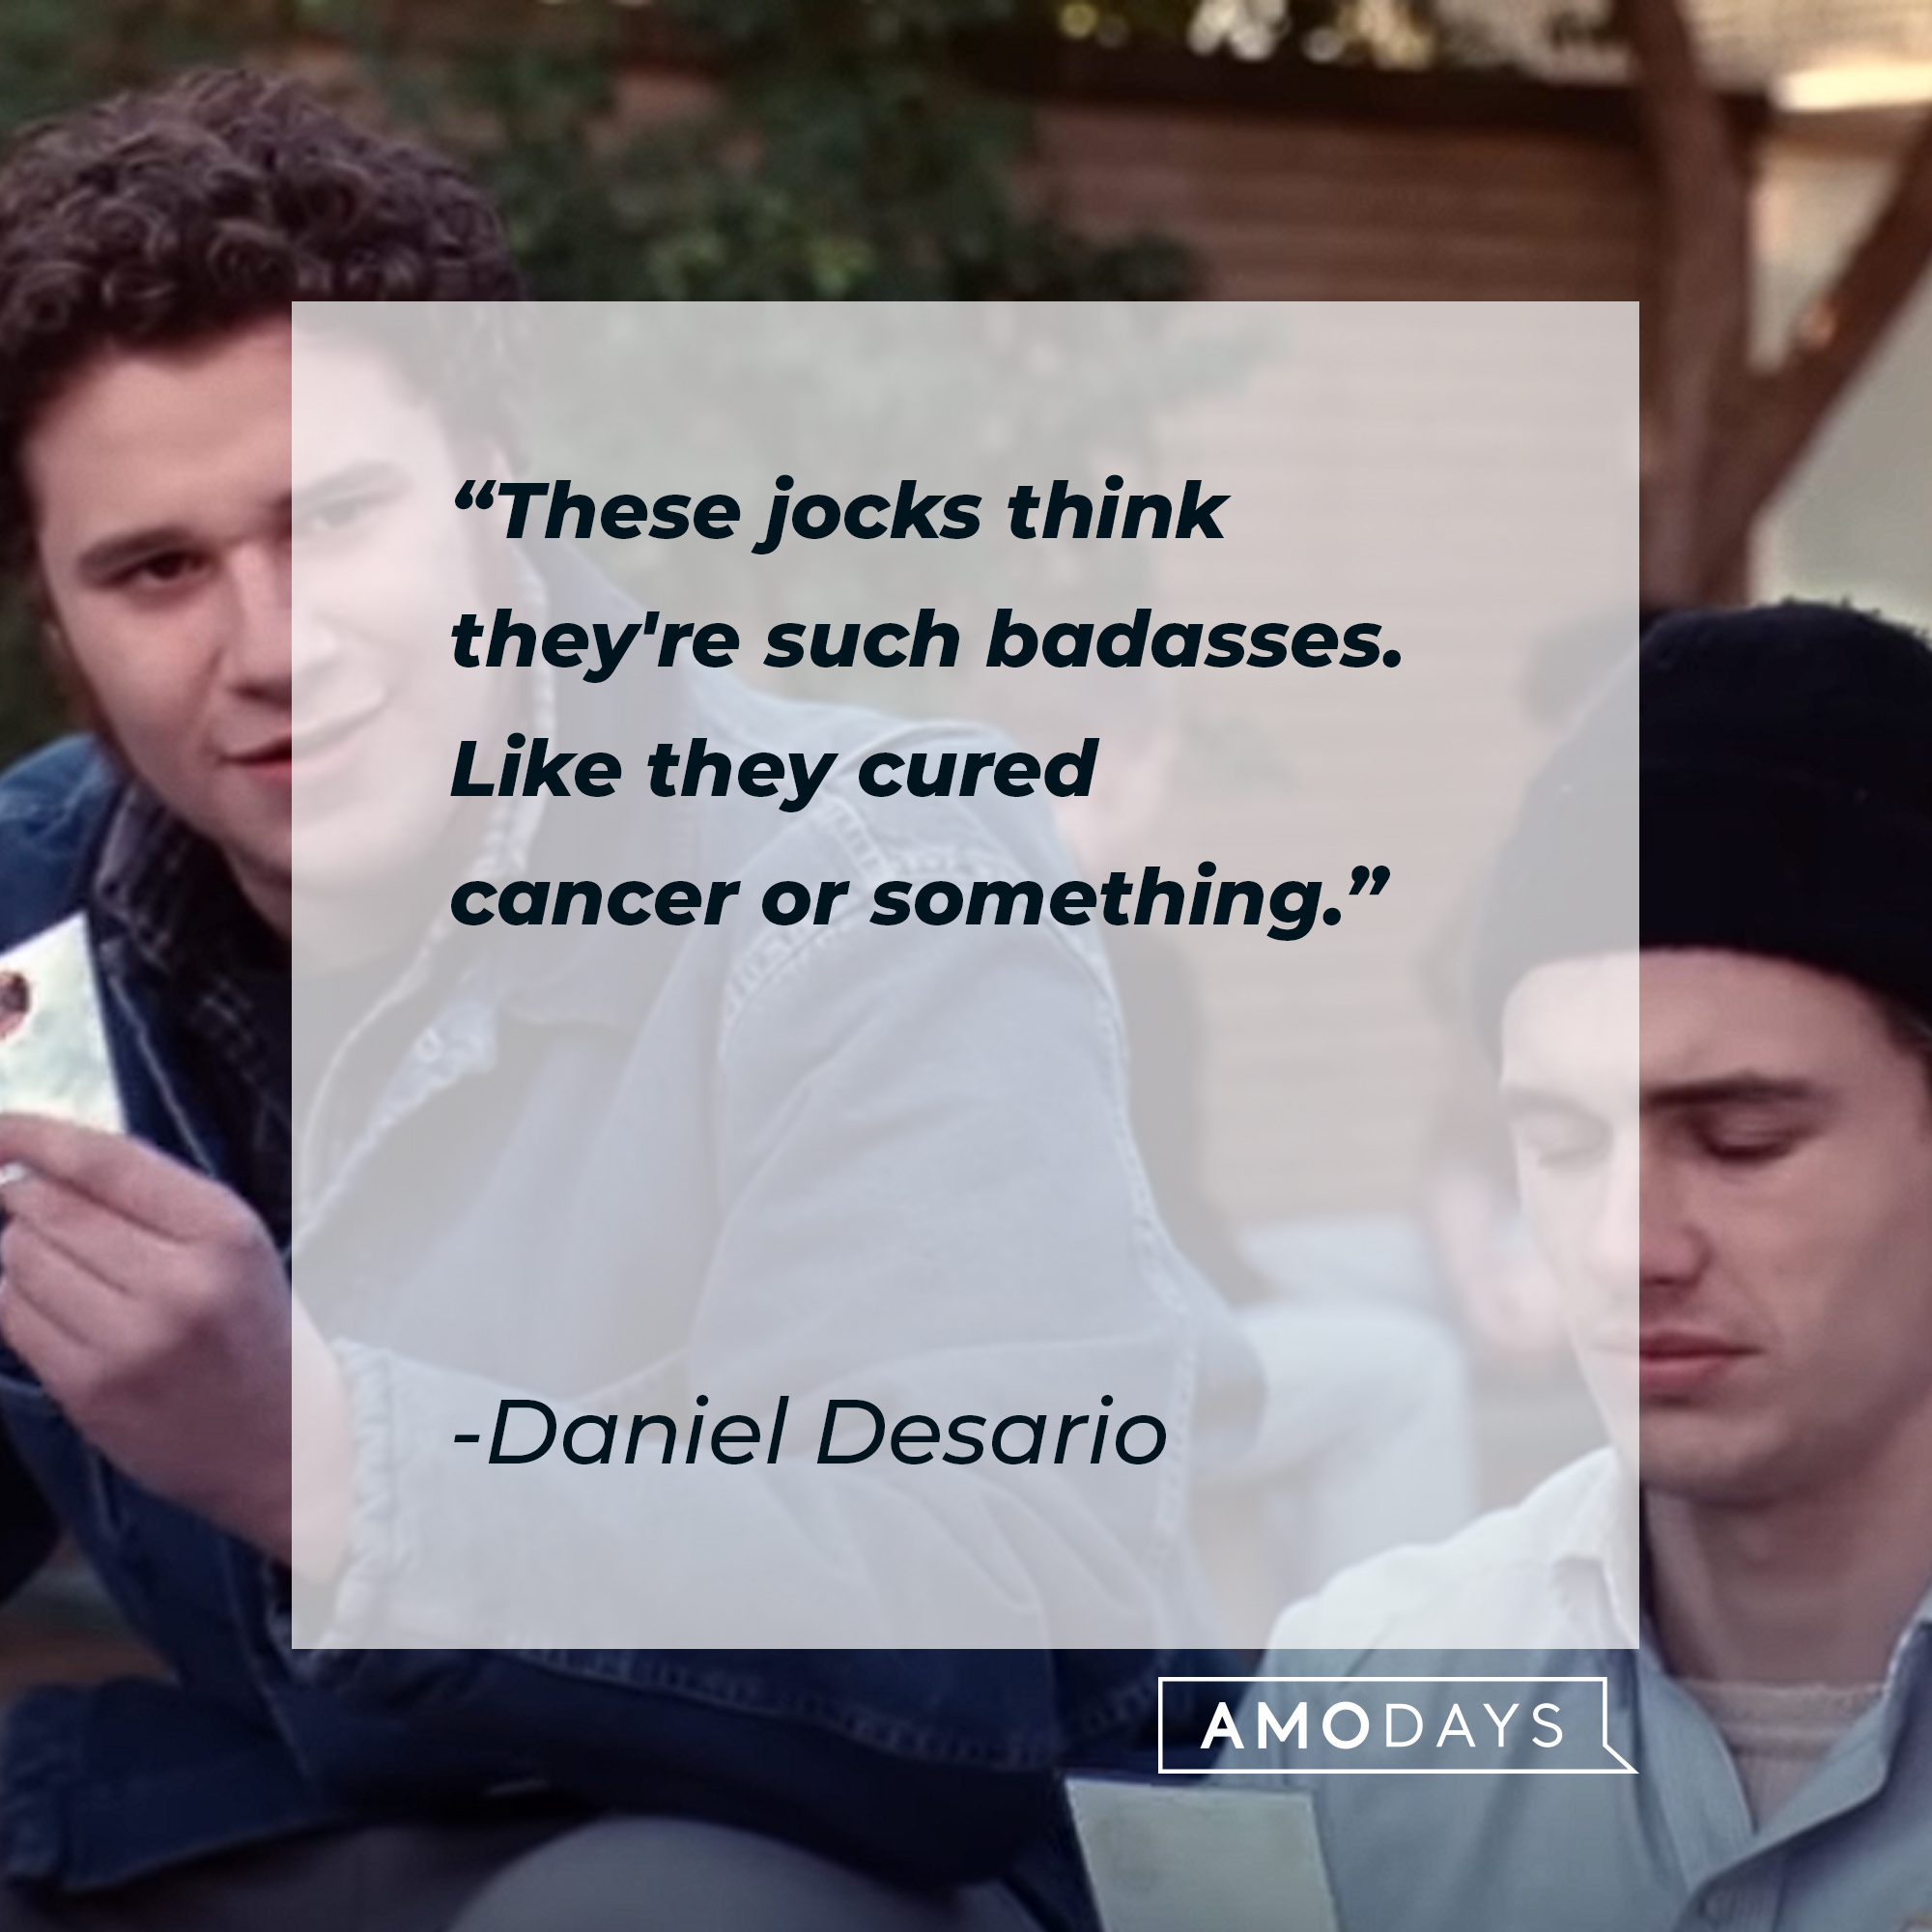 Daniel Desario's quote: "These jocks think they're such badasses. Like they cured cancer or something." | Source: Youtube.com/paramountmovies